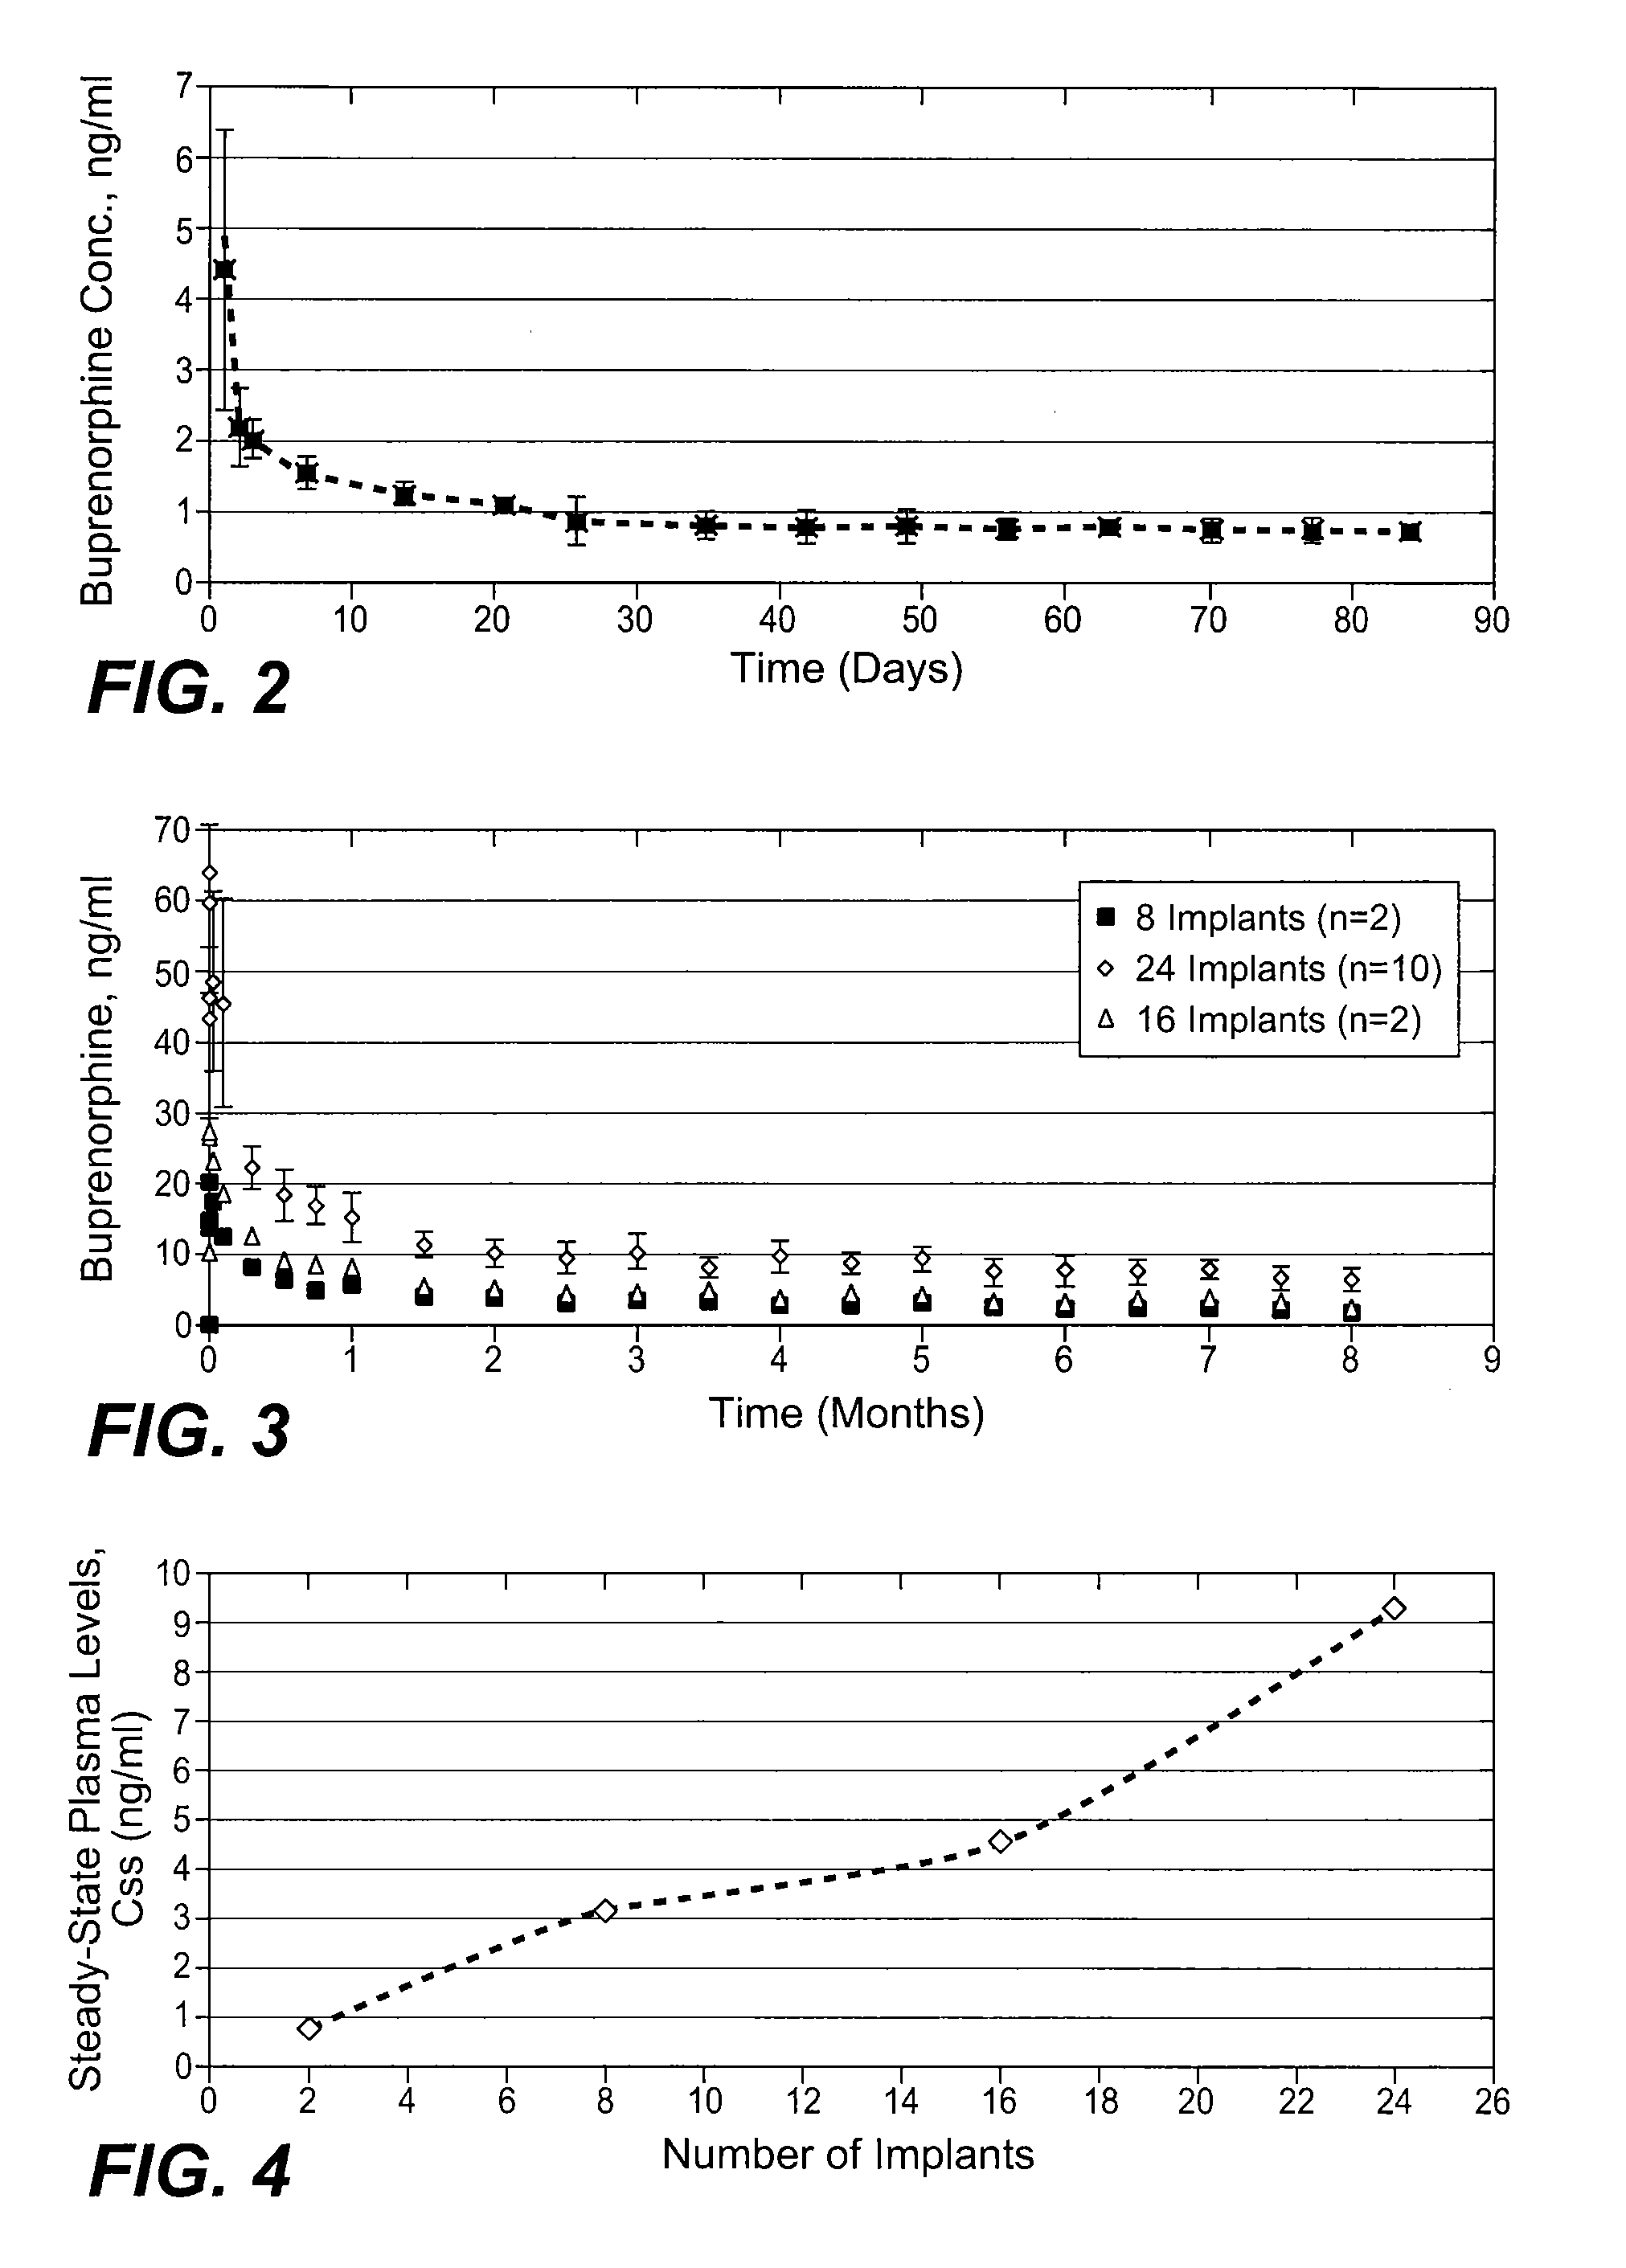 Implantable polymeric device for sustained release of buprenorphine